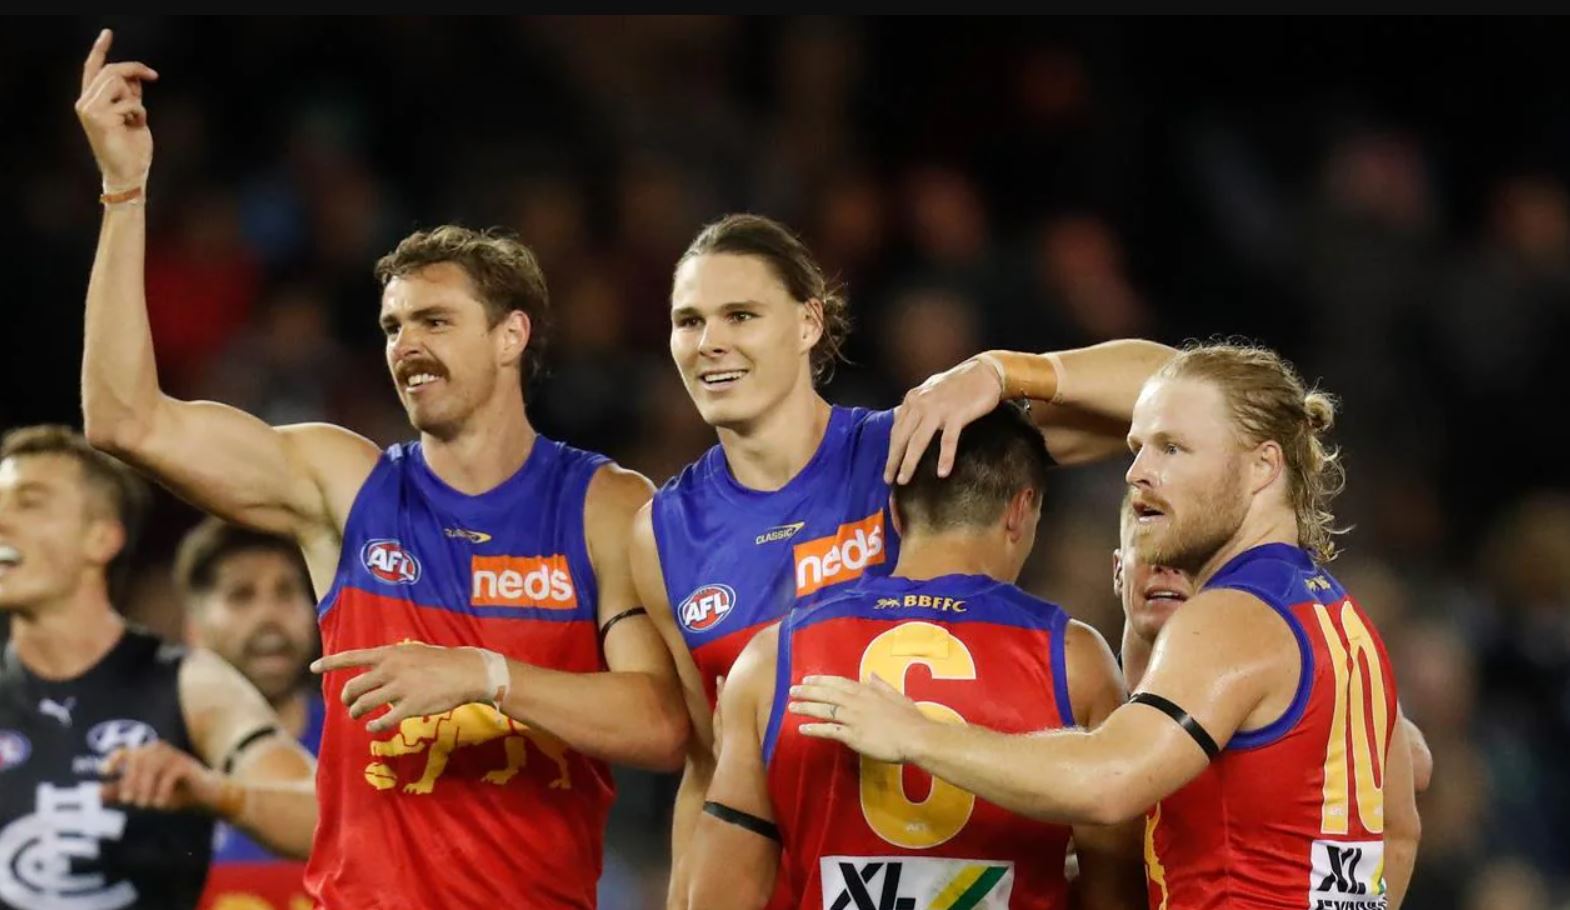 AFL 2021 Daily Fantasy Tips: Round 15 Lions v Cats